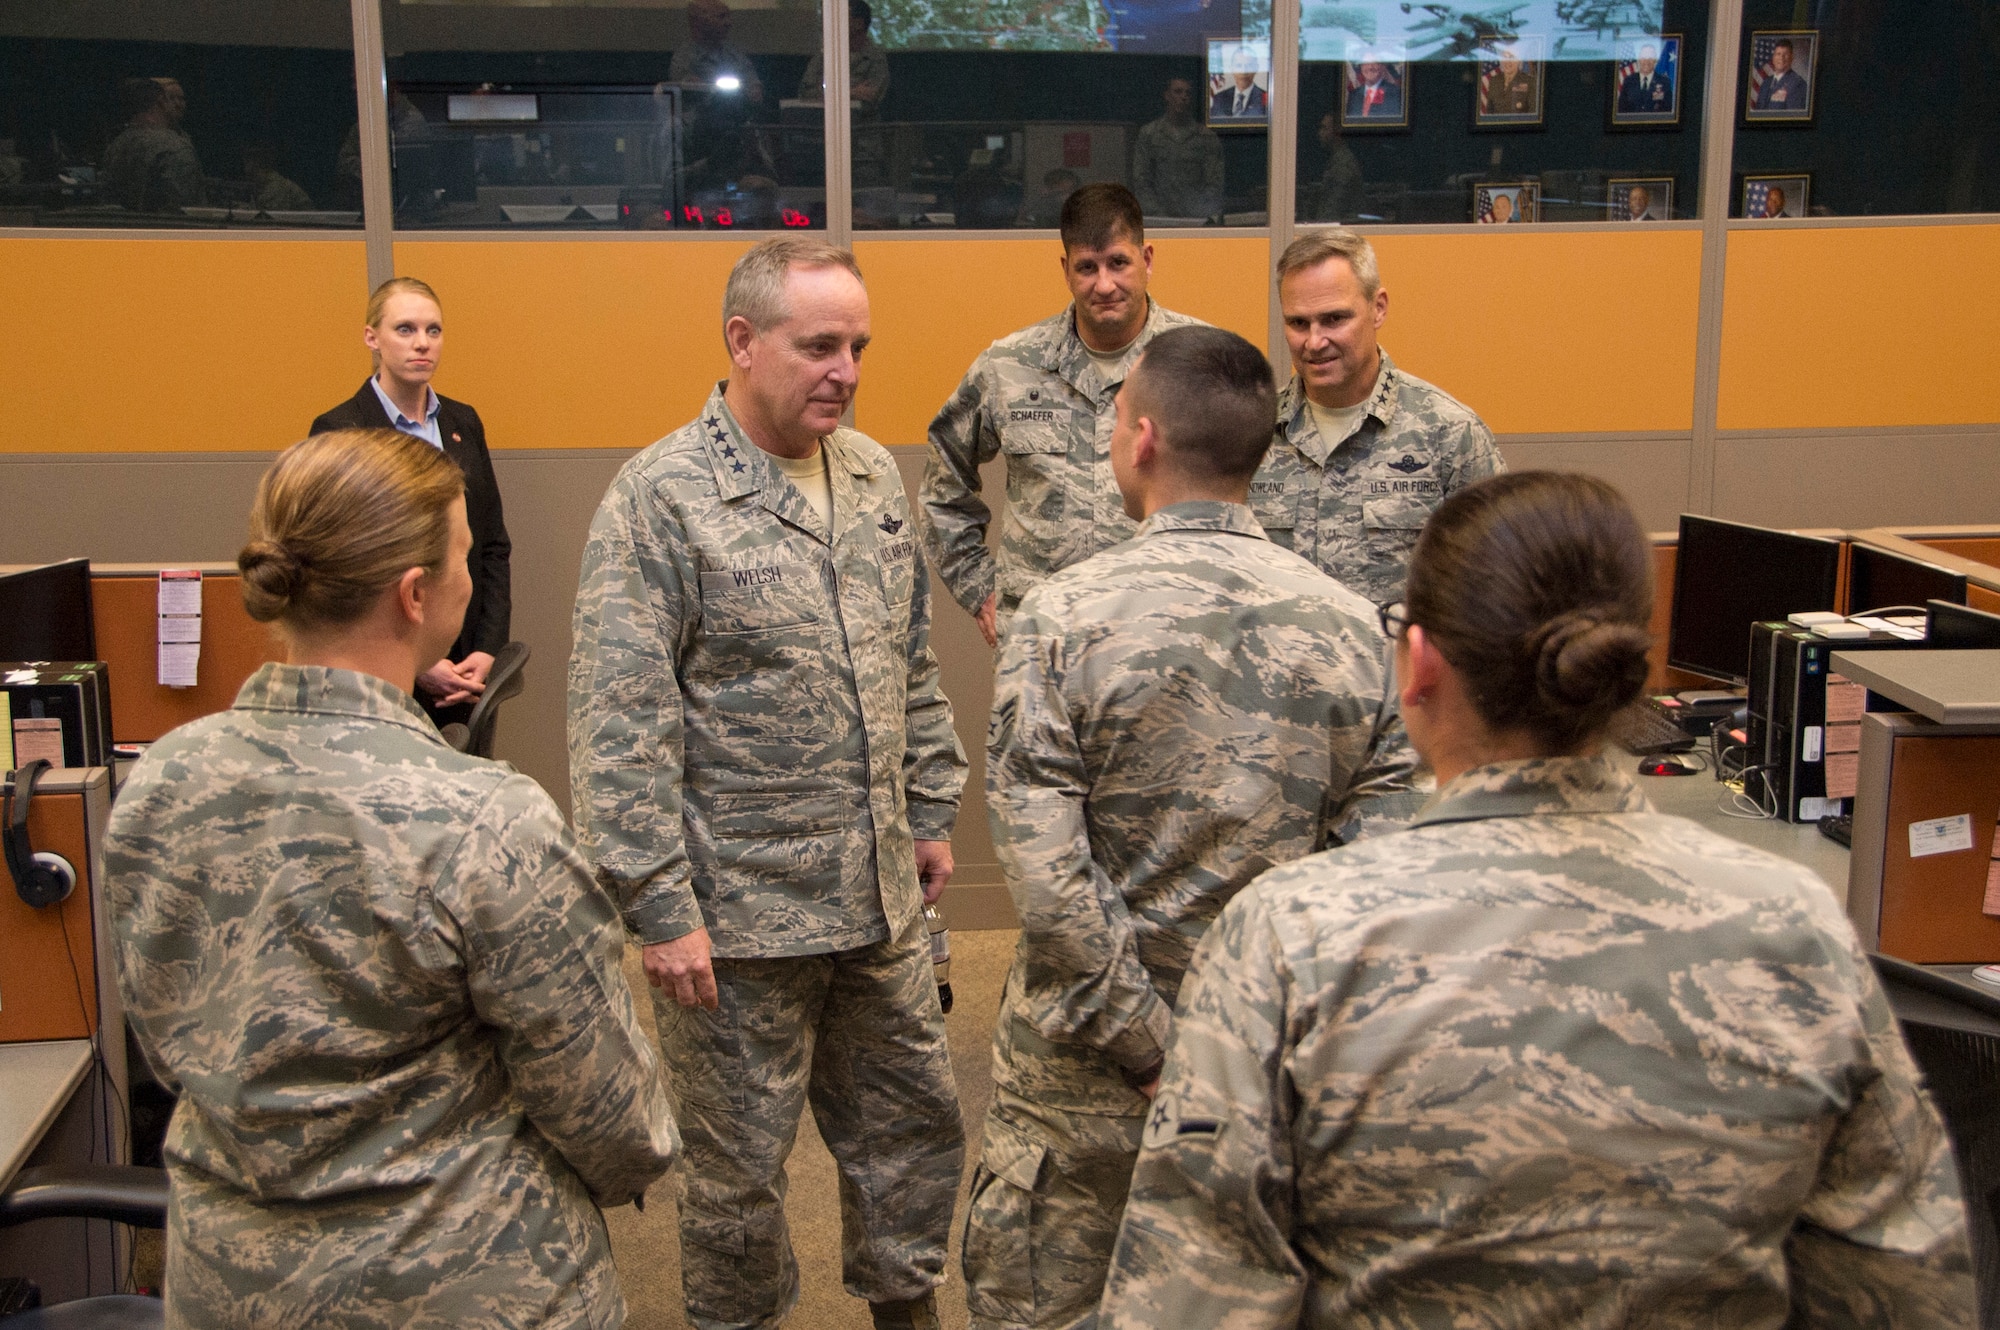 Air Force Chief of Staff Gen. Mark A. Welsh III, speaks with Airmen in the Air Mobility Division of the 612th Air Operations Center on March 25, 2015 at Davis-Monthan AFB, Ariz. The Airmen explained to Welsh what their division does and its importance for Air Forces Southern. (U.S. Air Force photo by Staff Sgt. Adam Grant/Released)